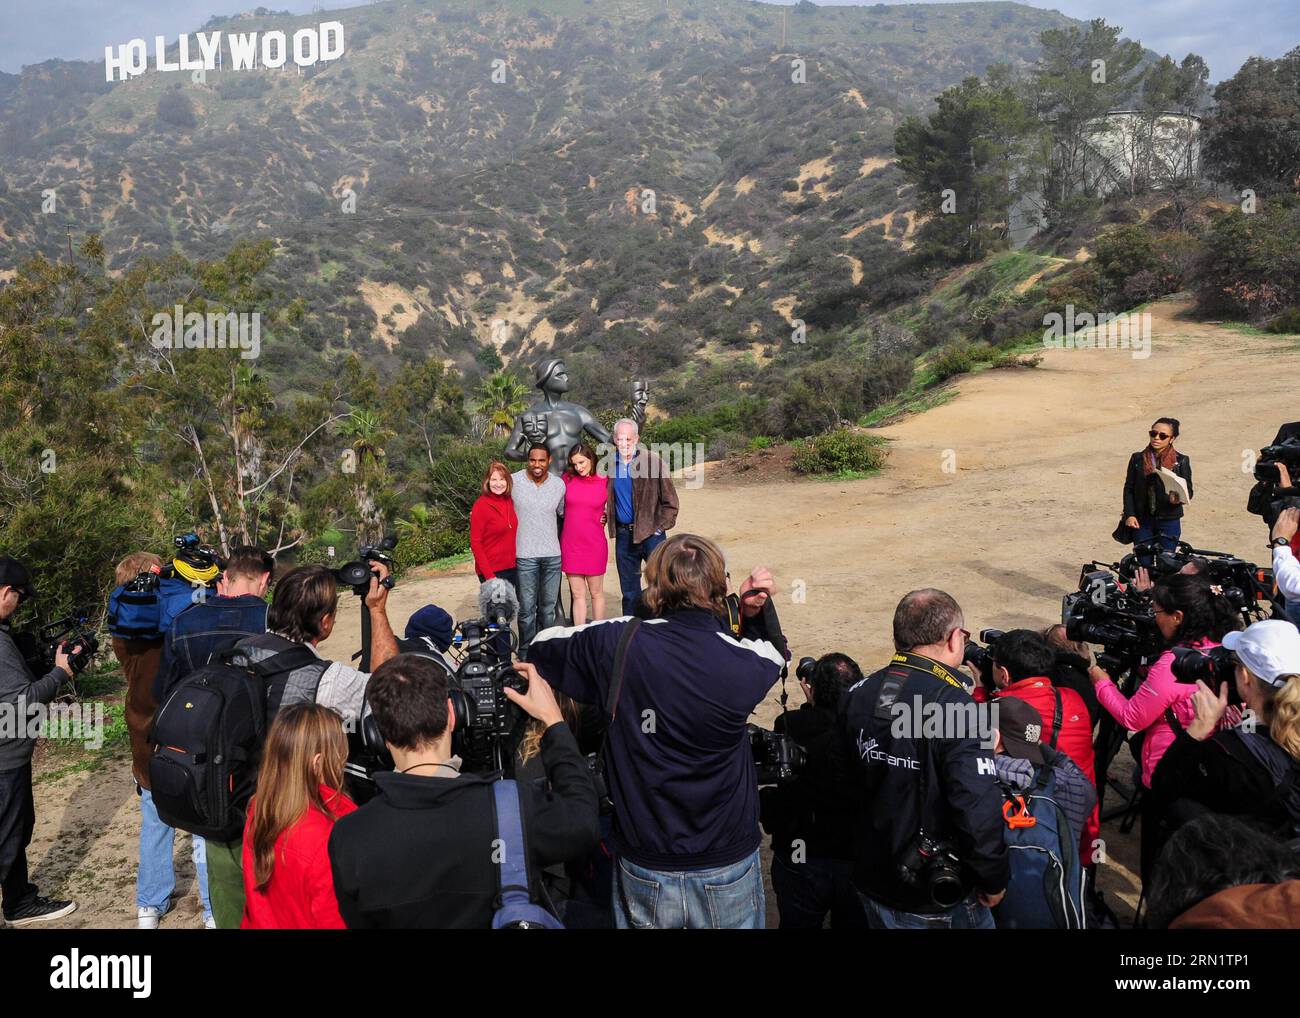 LOS ANGELES, Jan. 20, 2015 -- (L-R) Screen Actors Guild (SAG) Awards executive producer Kathy Connell, actors Jason George, Julie Lake and SAG Awards Vice Chair Daryl Anderson pose for photos next to a Screen Actors Guild statue in front of the Hollywood sign in Los Angeles, the United States, Jan. 20, 2015. The SAG awards will be presented on Jan. 25. ) U.S.-LOS ANGELES-SAG-STATUE ZhangxChaoqun PUBLICATIONxNOTxINxCHN   Los Angeles Jan 20 2015 l r Screen Actors Guild sag Awards Executive Producer Kathy Connell Actors Jason George Julie Lake and sag Awards Vice Chair Daryl Anderson said Pose fo Stock Photo